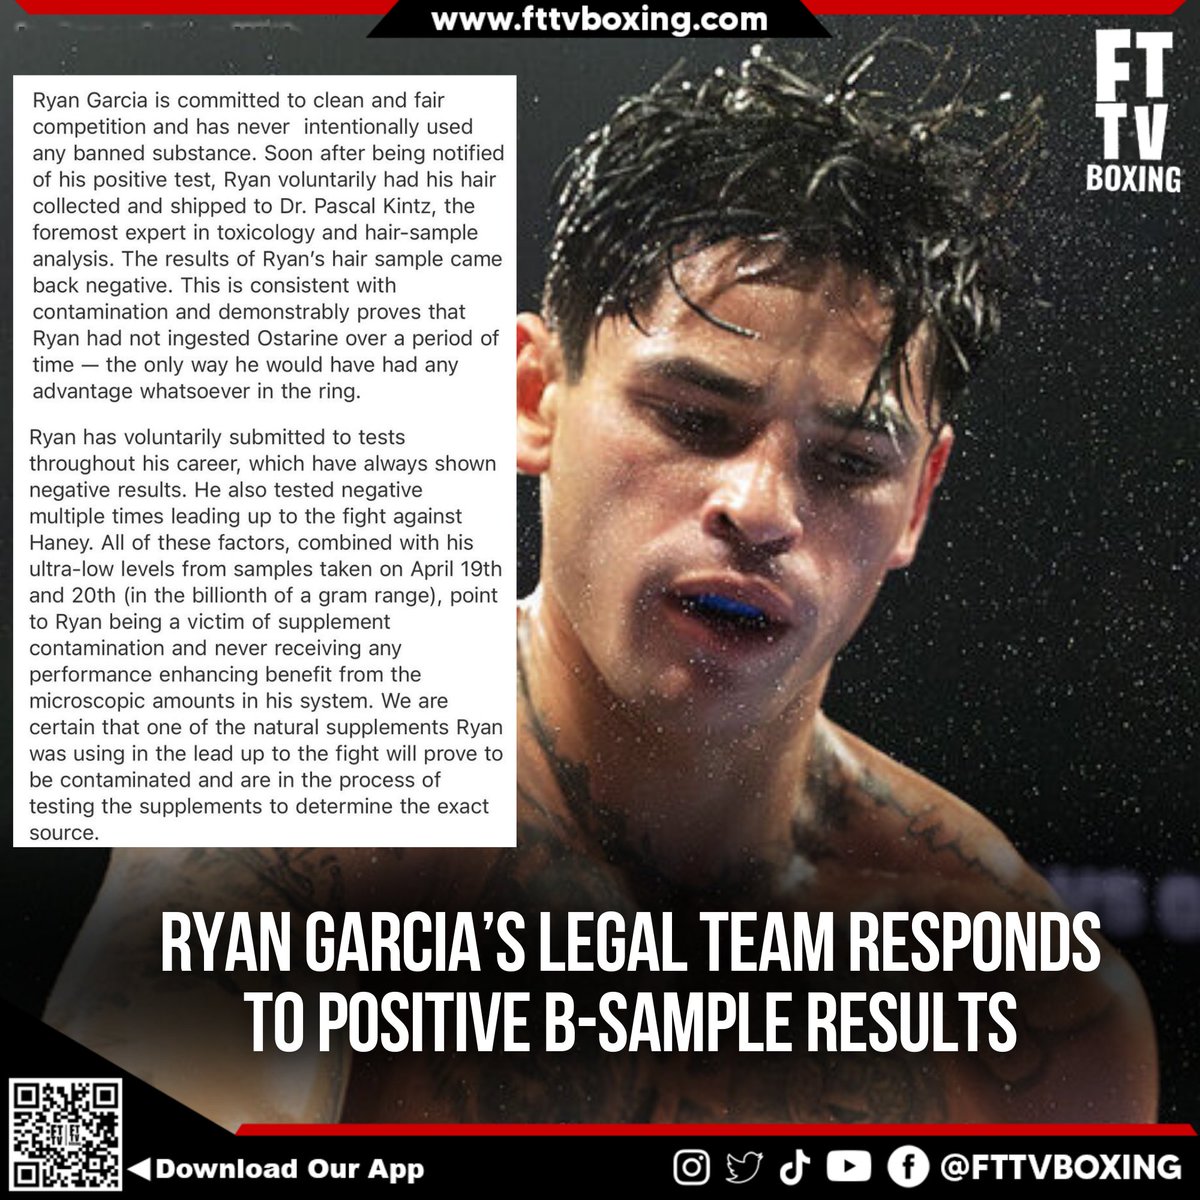 Legal Team Cites Negative Hair Test, Claims Contamination!- Do you believe Ryan Garcia’s claim of supplement contamination, or do the positive tests prove otherwise?

#RyanGarcia #BoxingNews #DrugTest #Ostarine #DevinHaney #BoxingScandal #FightNight #BoxingCommunity #LegalBattle